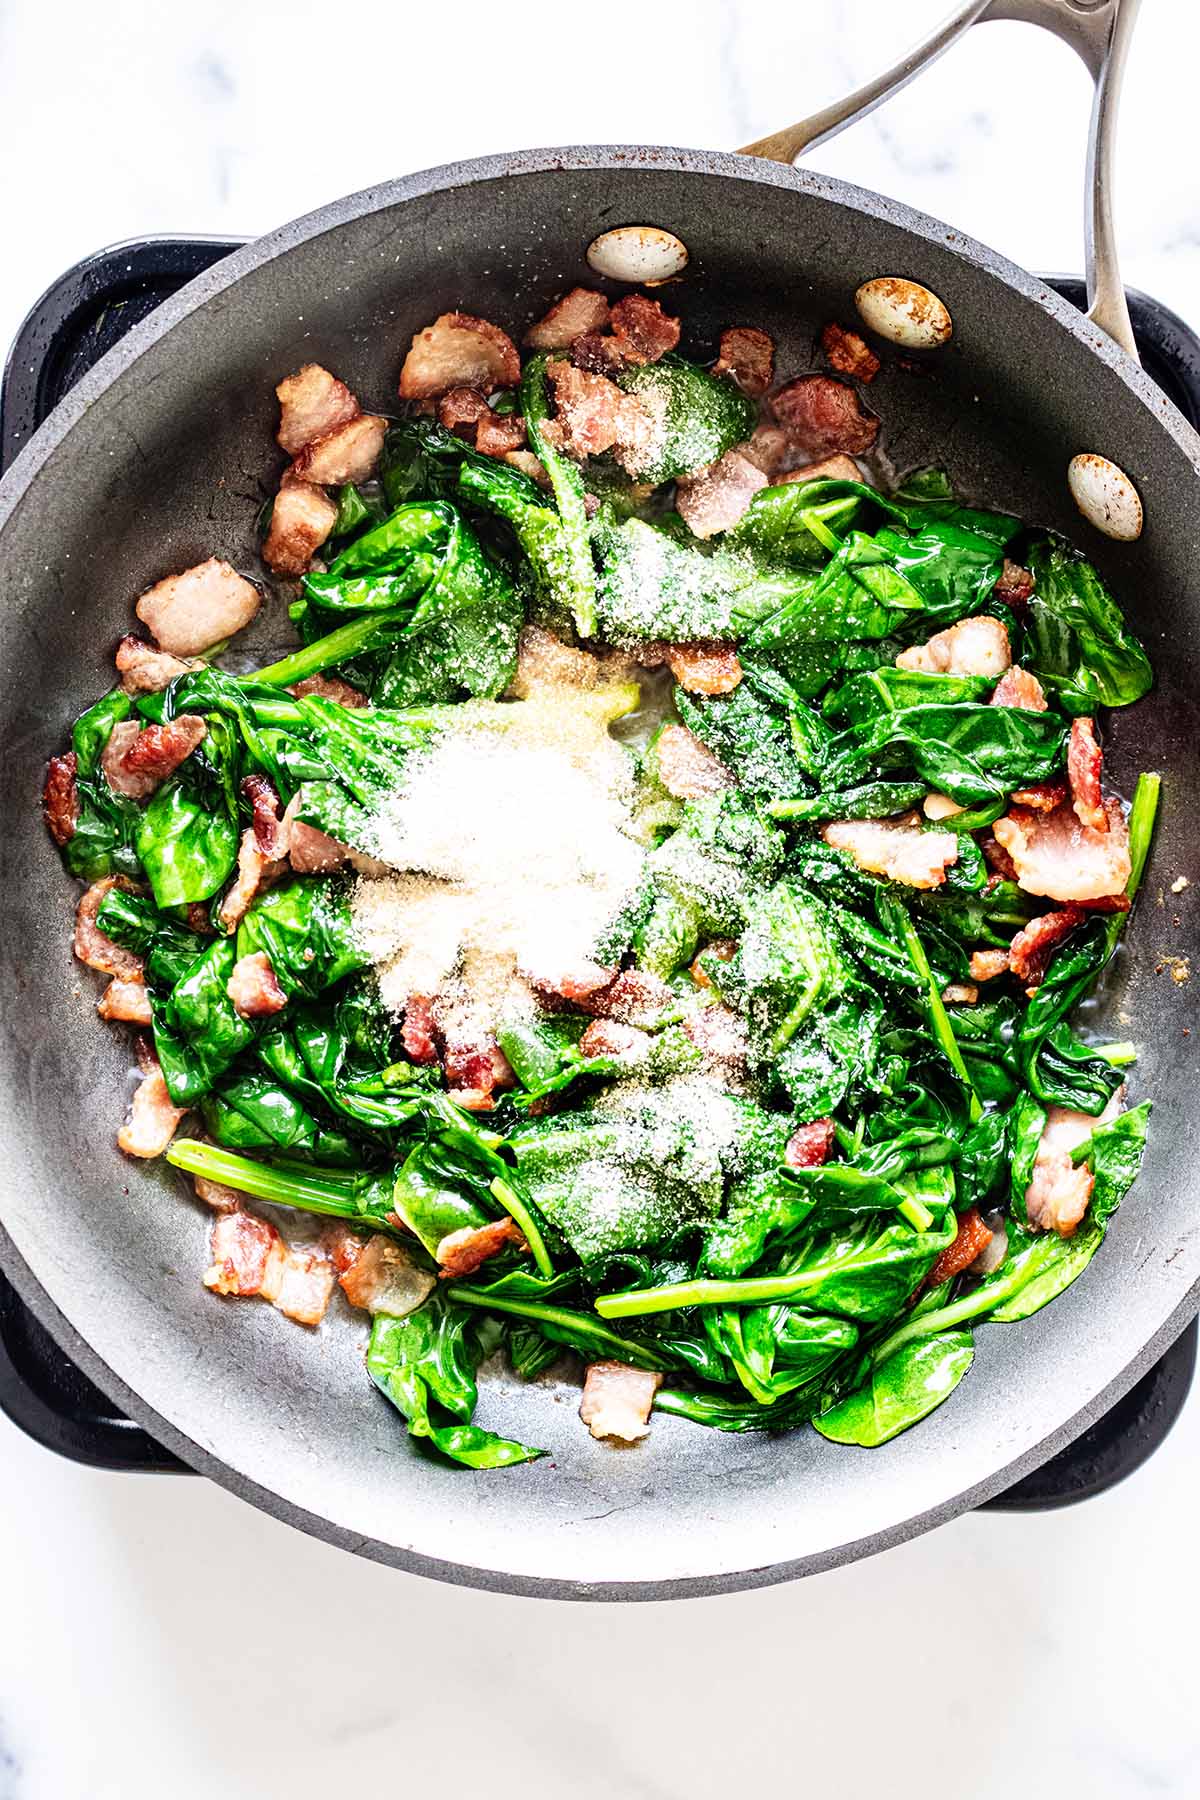 Onion powder, spinach and bacon cooking in a skillet